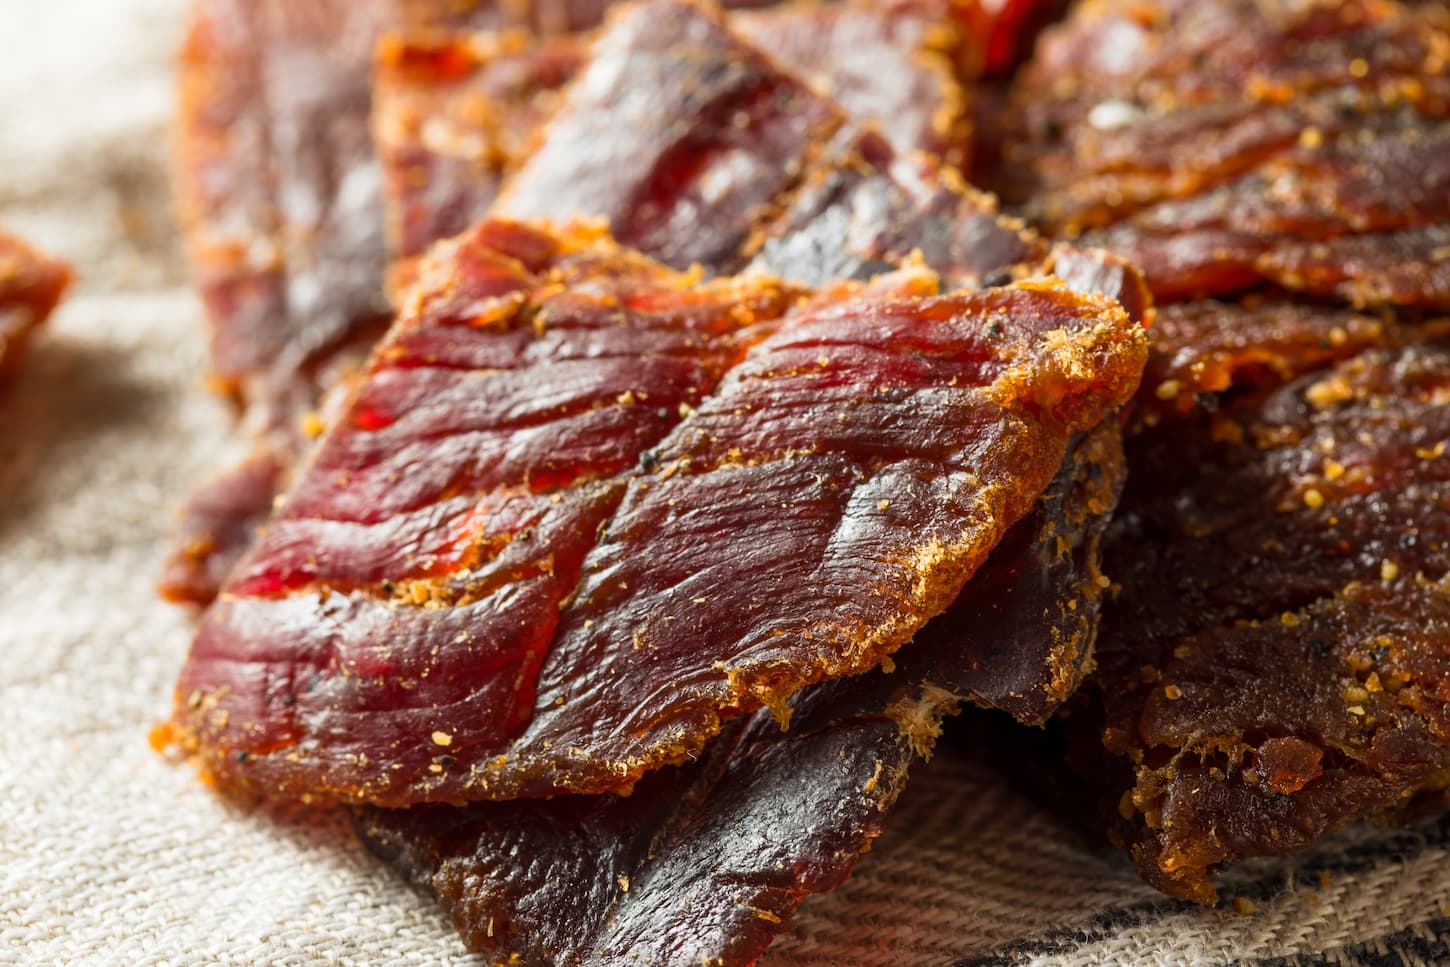 How Long Does It Take to Freeze-Dry Jerky?